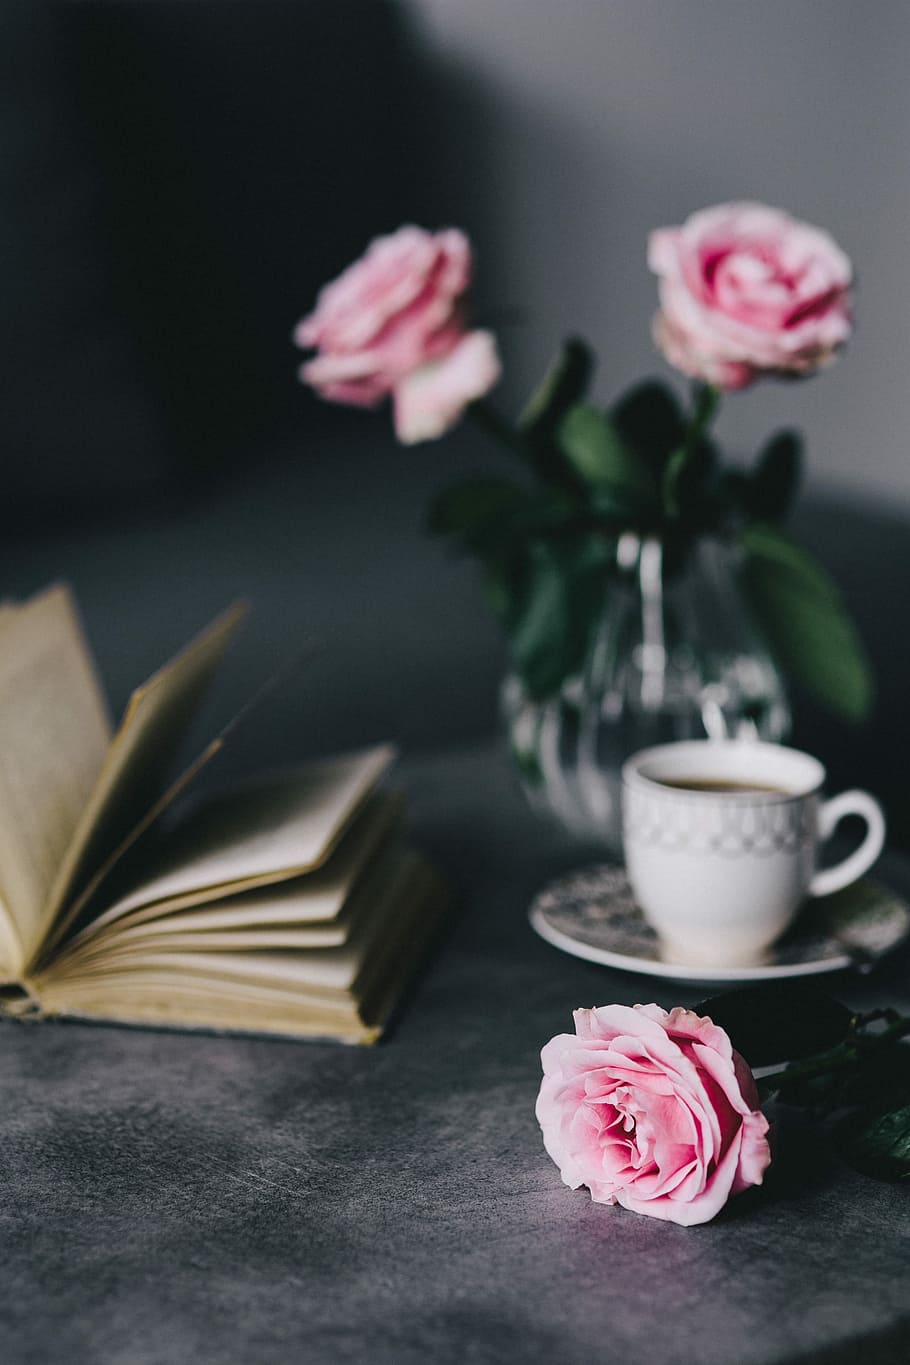 HD wallpaper: Lovely roseses, book and coffee, interior, resting, relax,  essentials | Wallpaper Flare